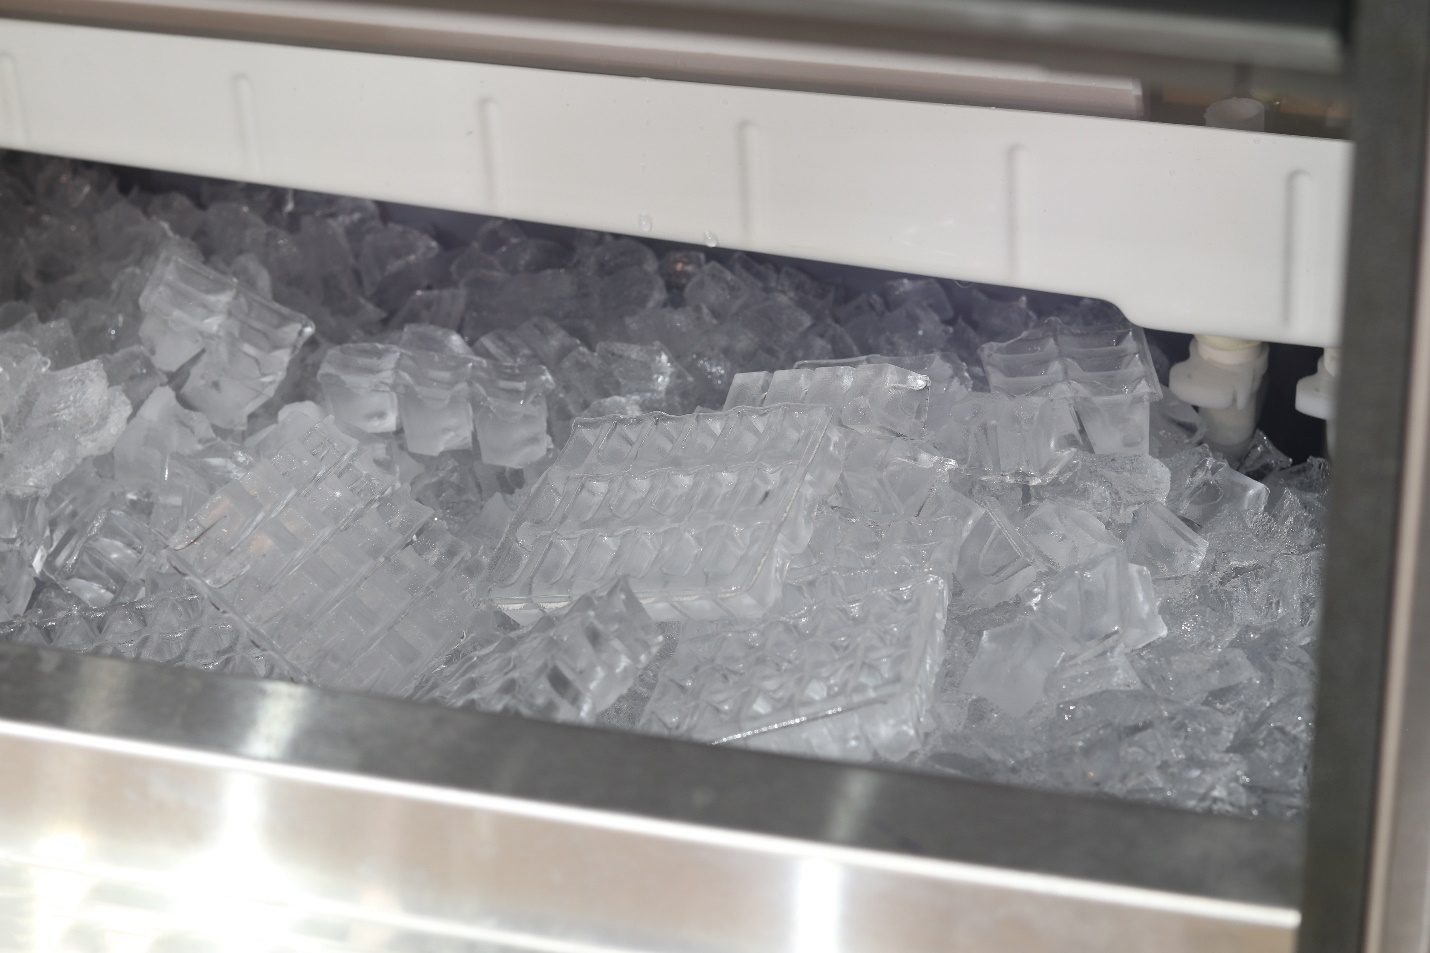 a close-up short of ice cubes in an ice machine